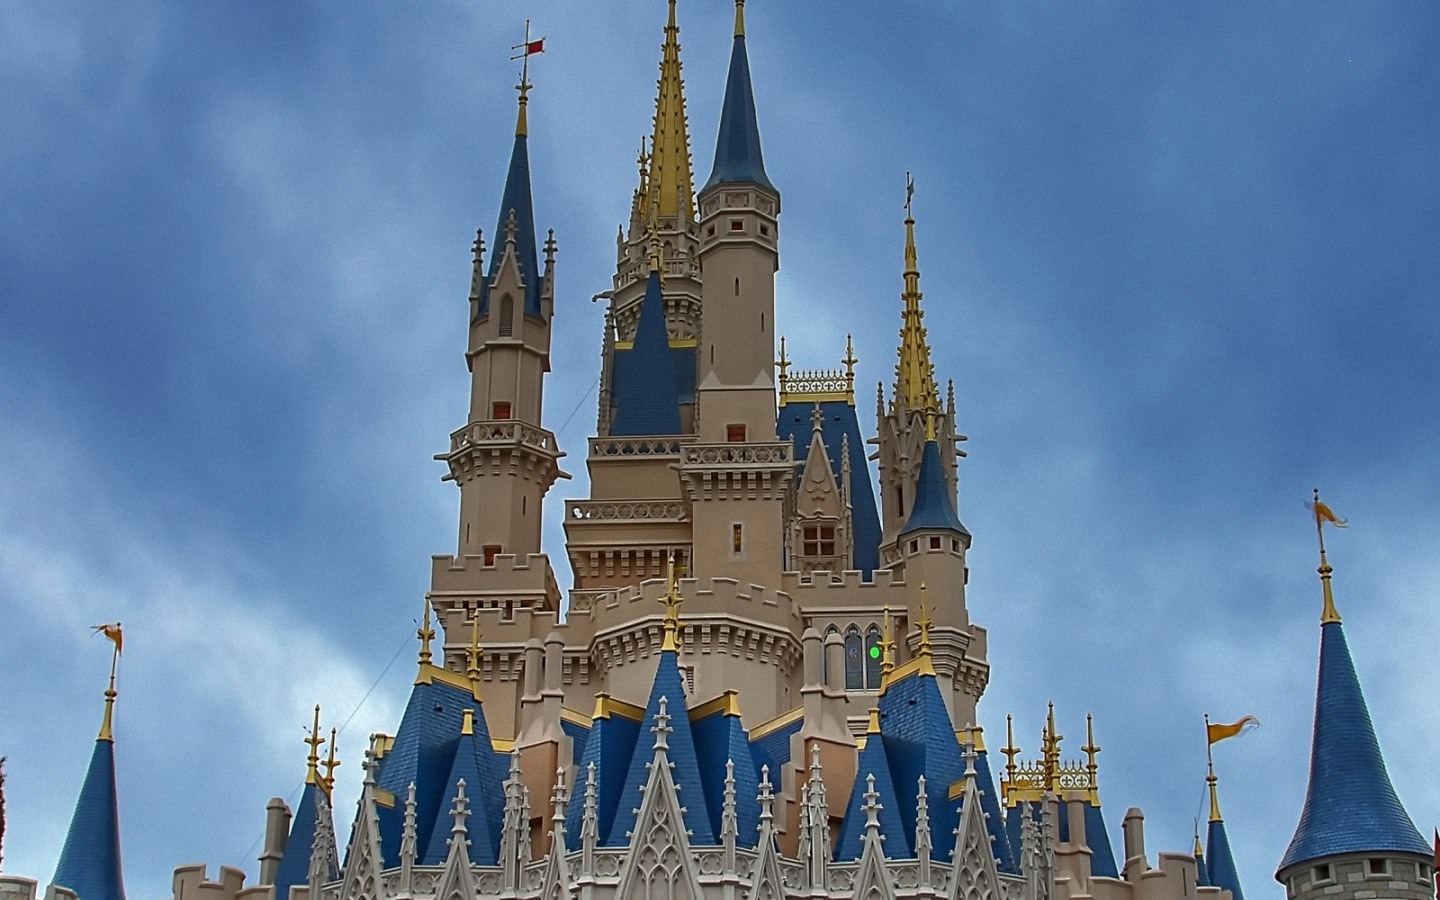  WallpapersDisney World 1440x900 Wallpapers Pictures Free Download